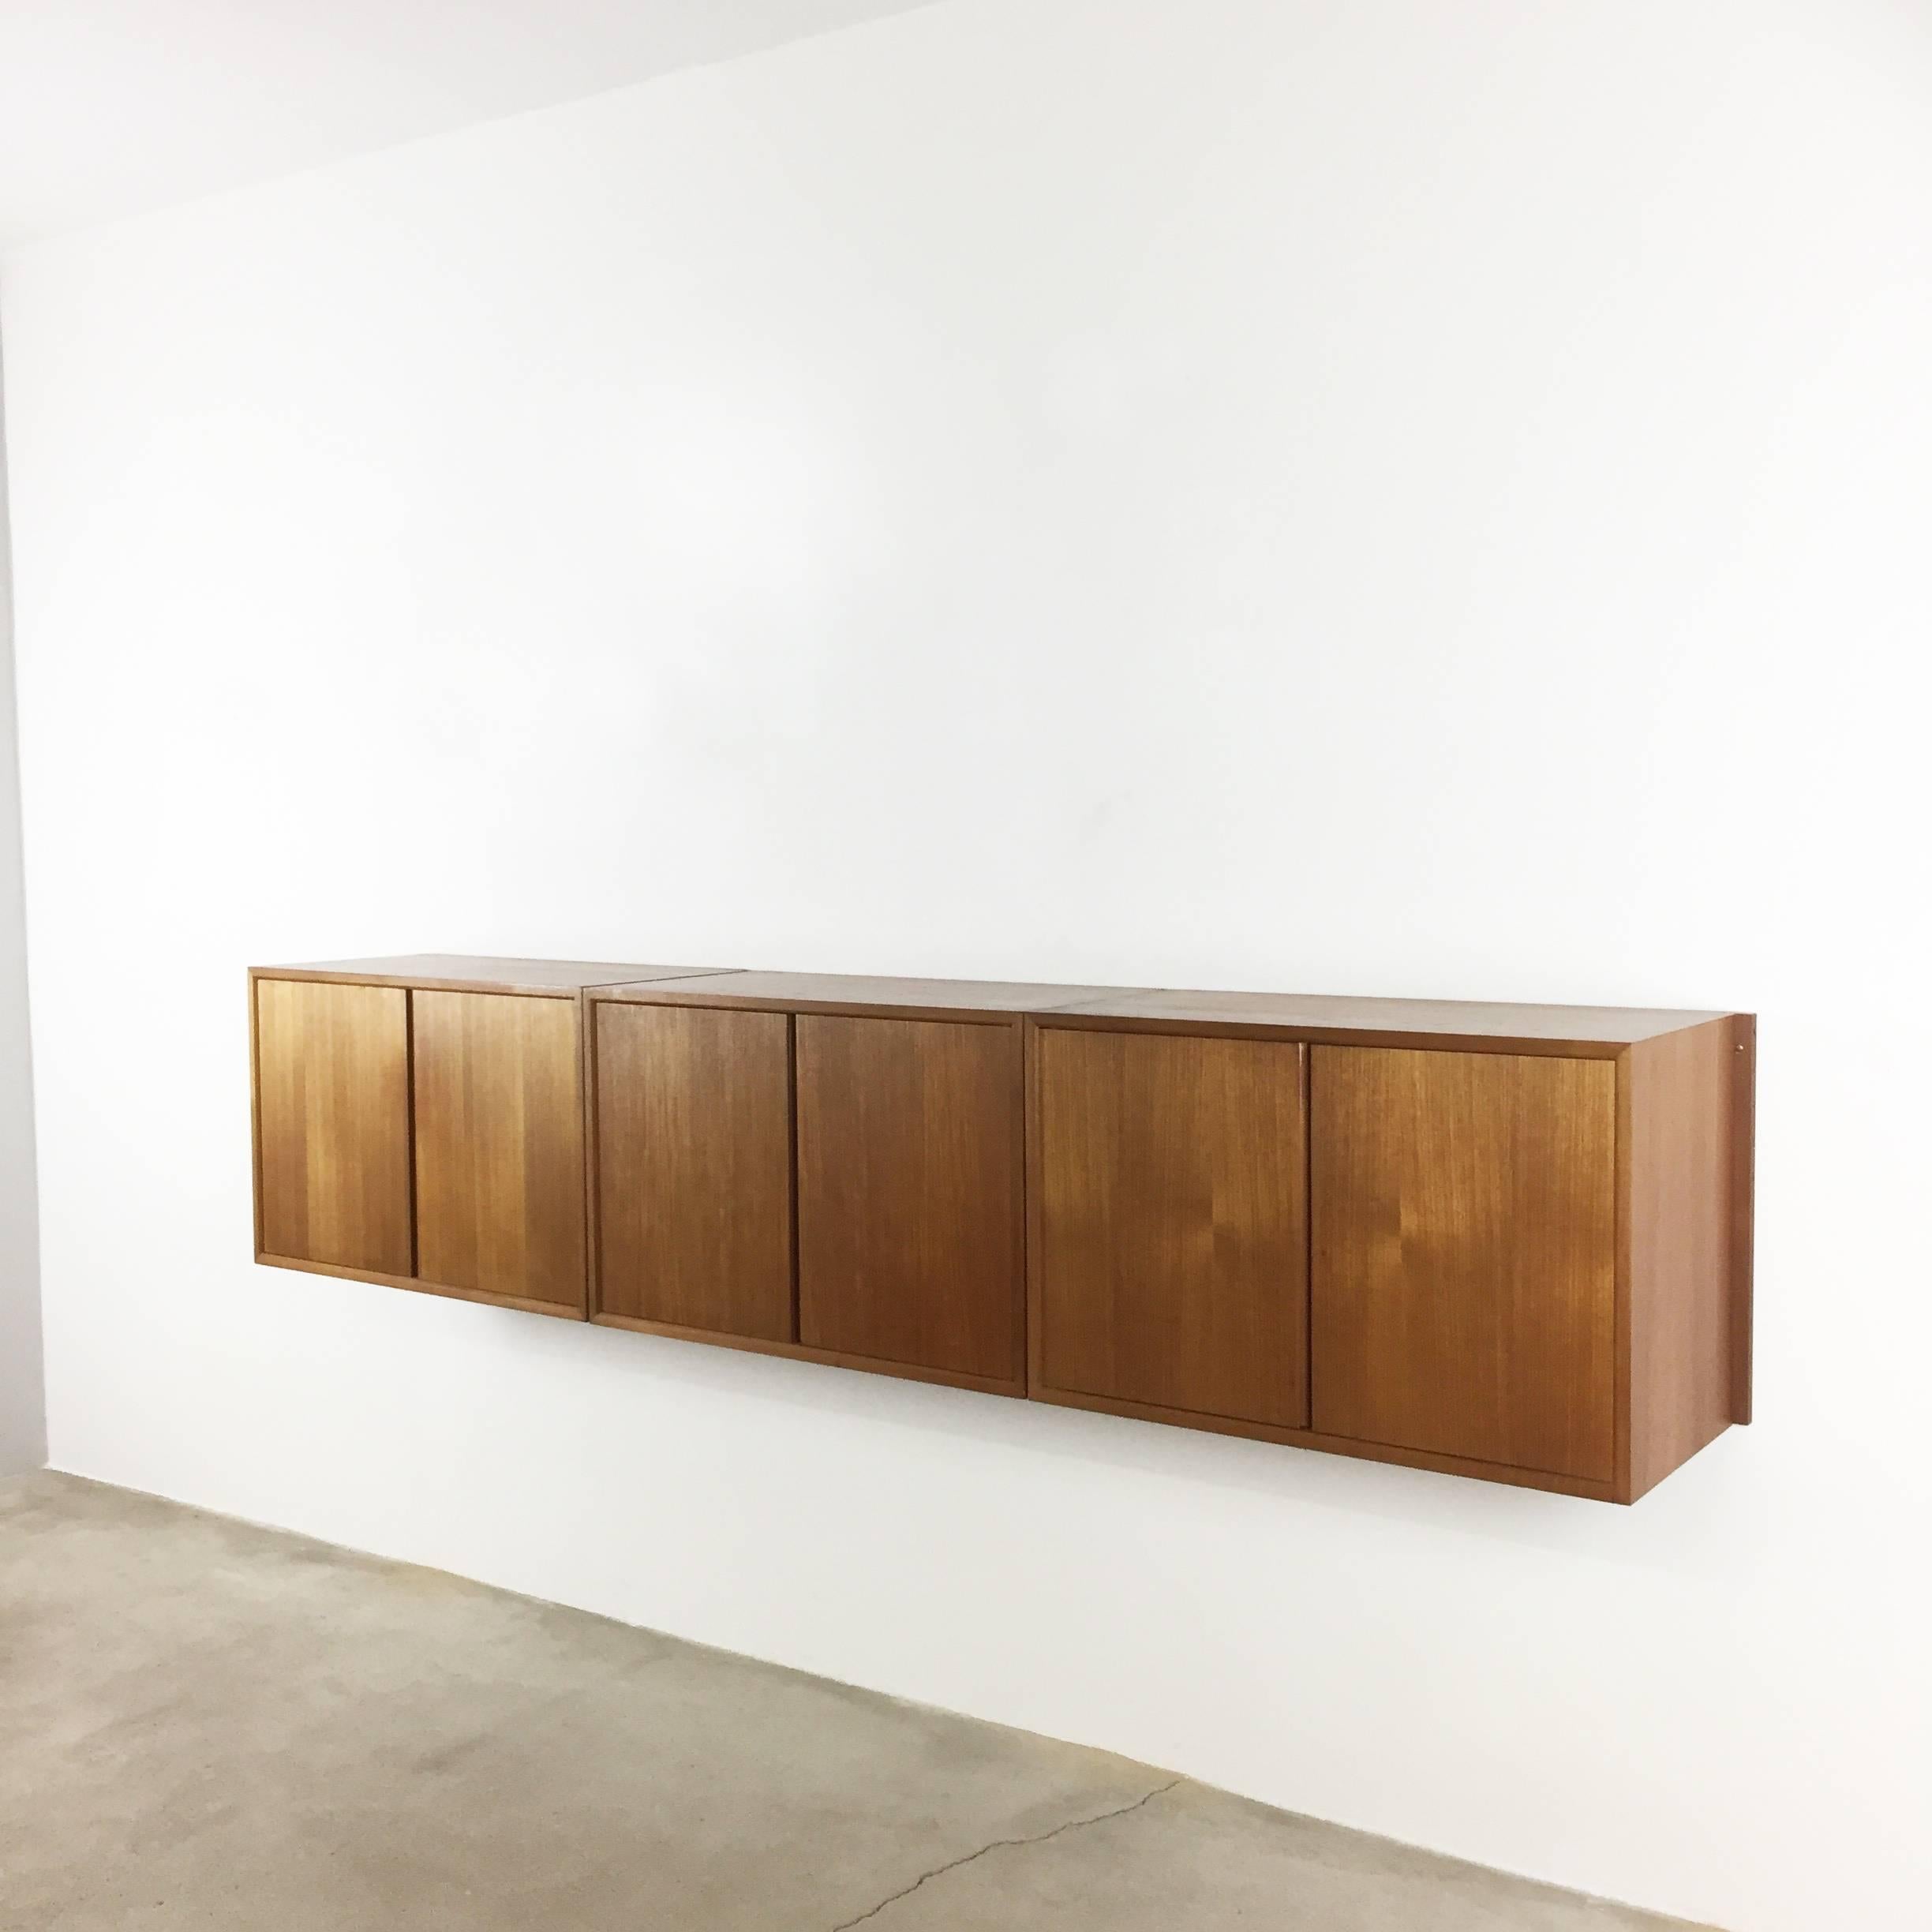 Article:

Wall unit teak wood Cado Royal


Designer:

Poul Cadovius


Producer:

CADO, Denmark



Description:

Original Danish wall unit designed by Poul Cadovius in the 1950s for CADO, Denmark. This listed unit was produced by